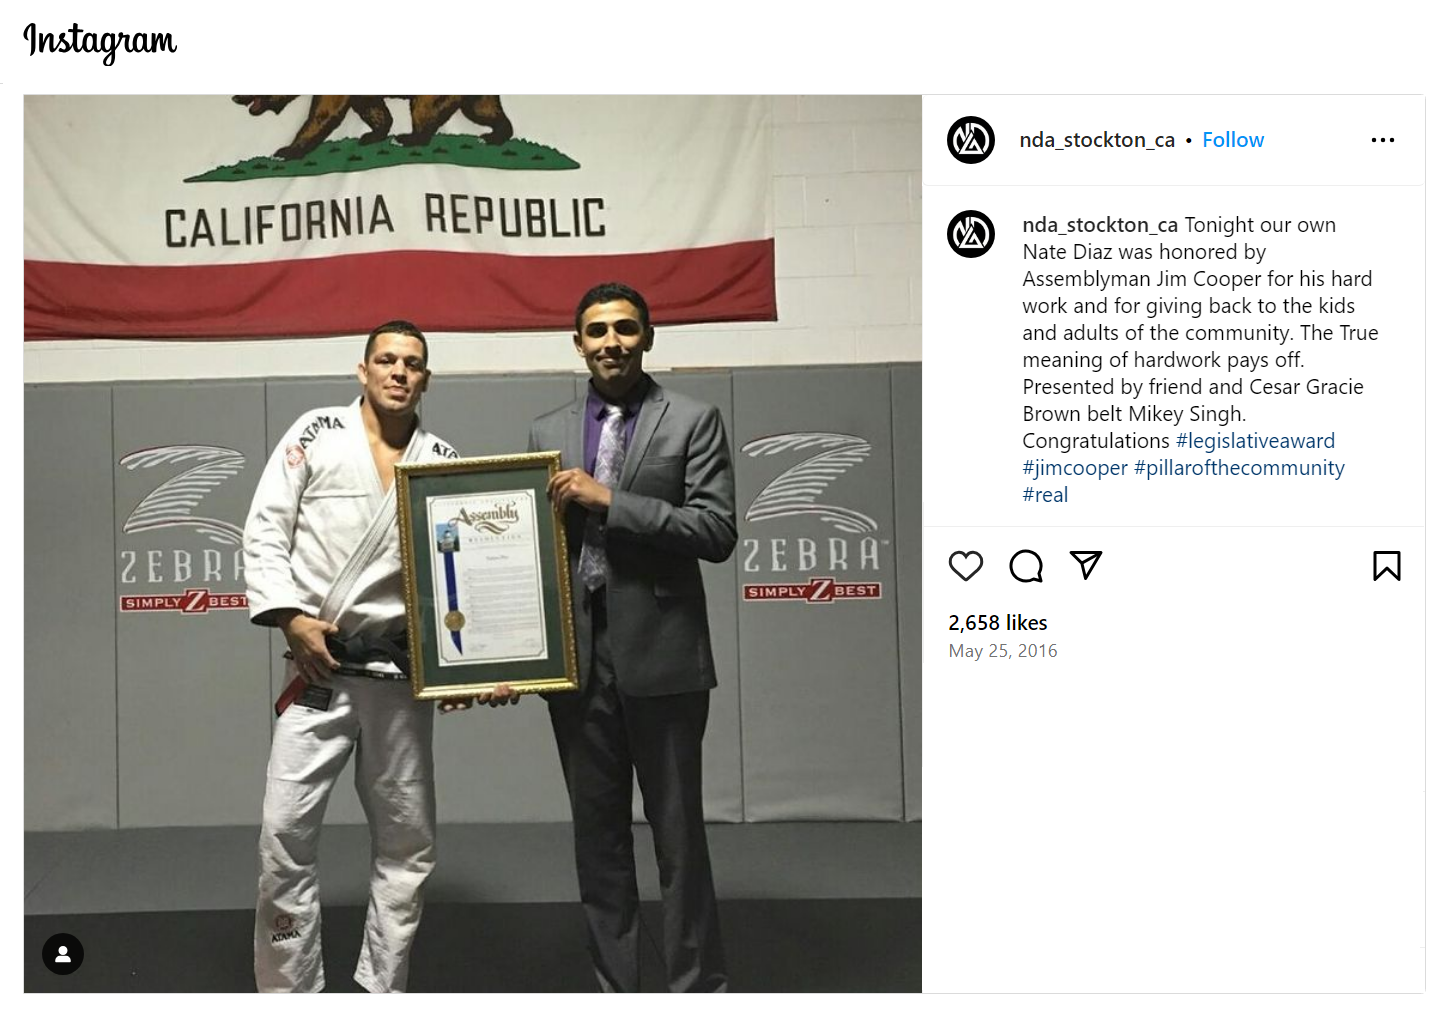 Nate Diaz was honored by Assemblyman Jim Cooper for his hard work and for giving back to the kids and adults of the community. 